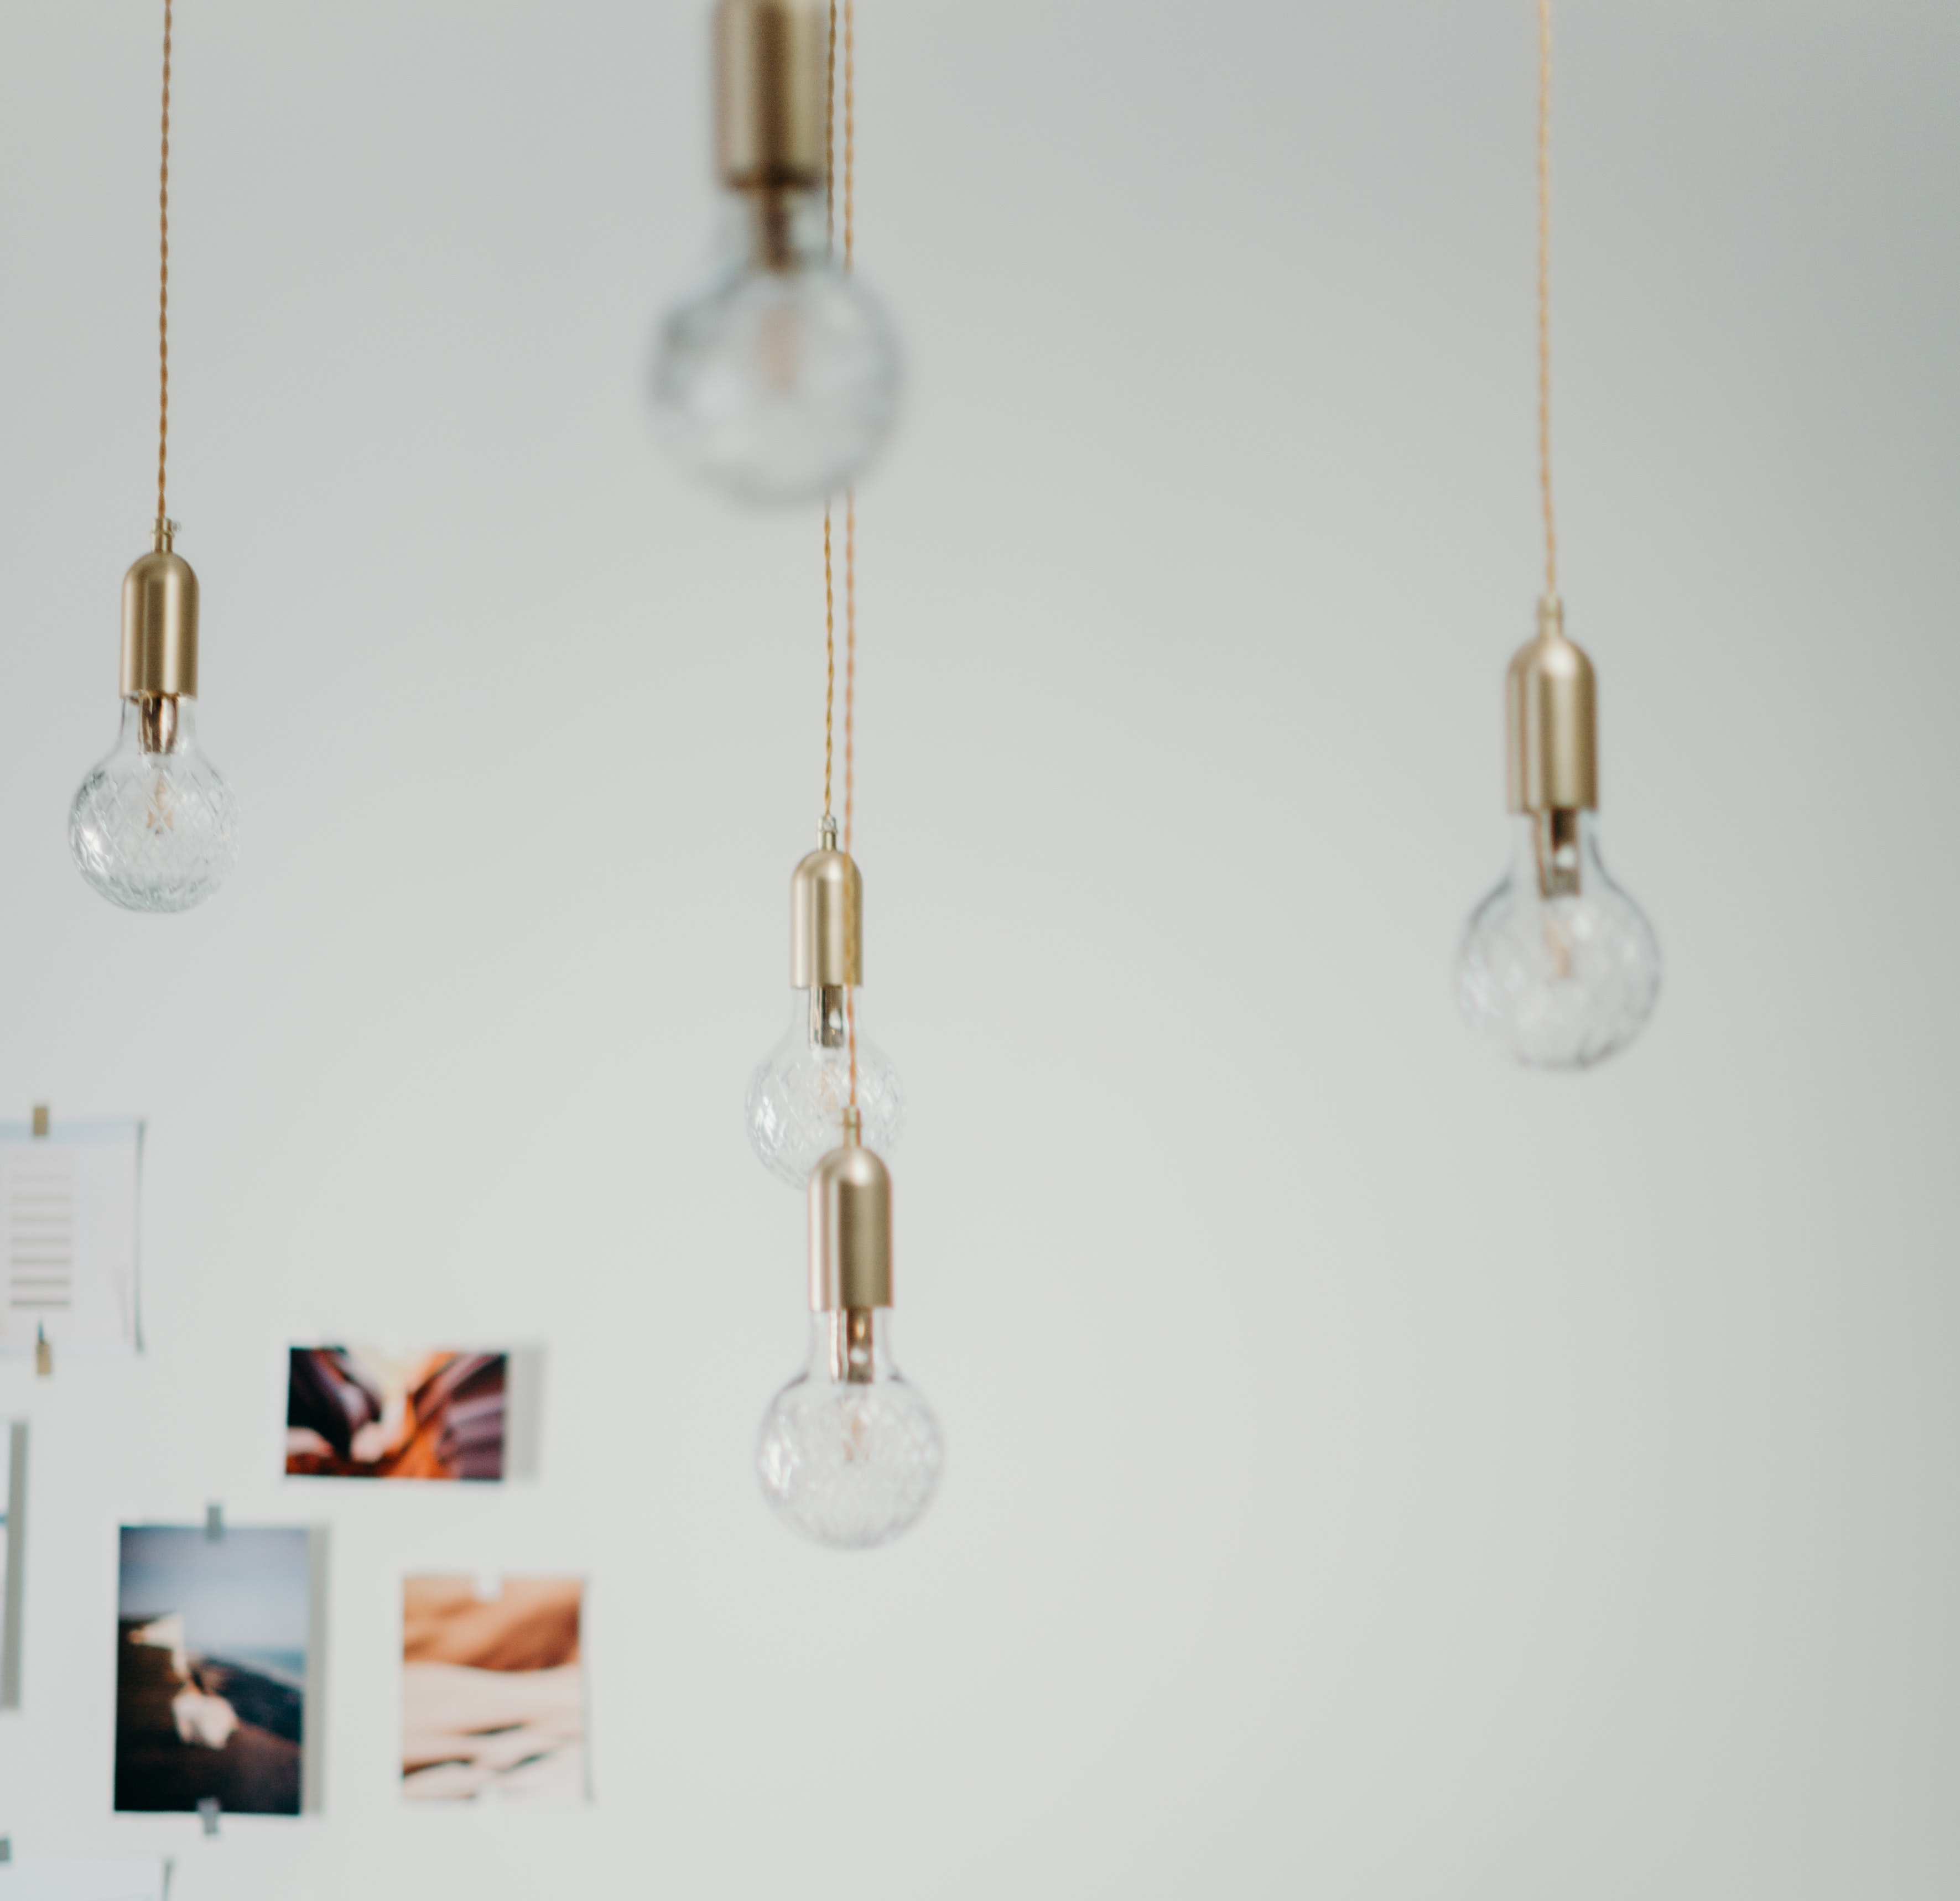 Lightbulbs with gold accents hang from the ceiling, as we look at a wall with images taped up, out of focus.